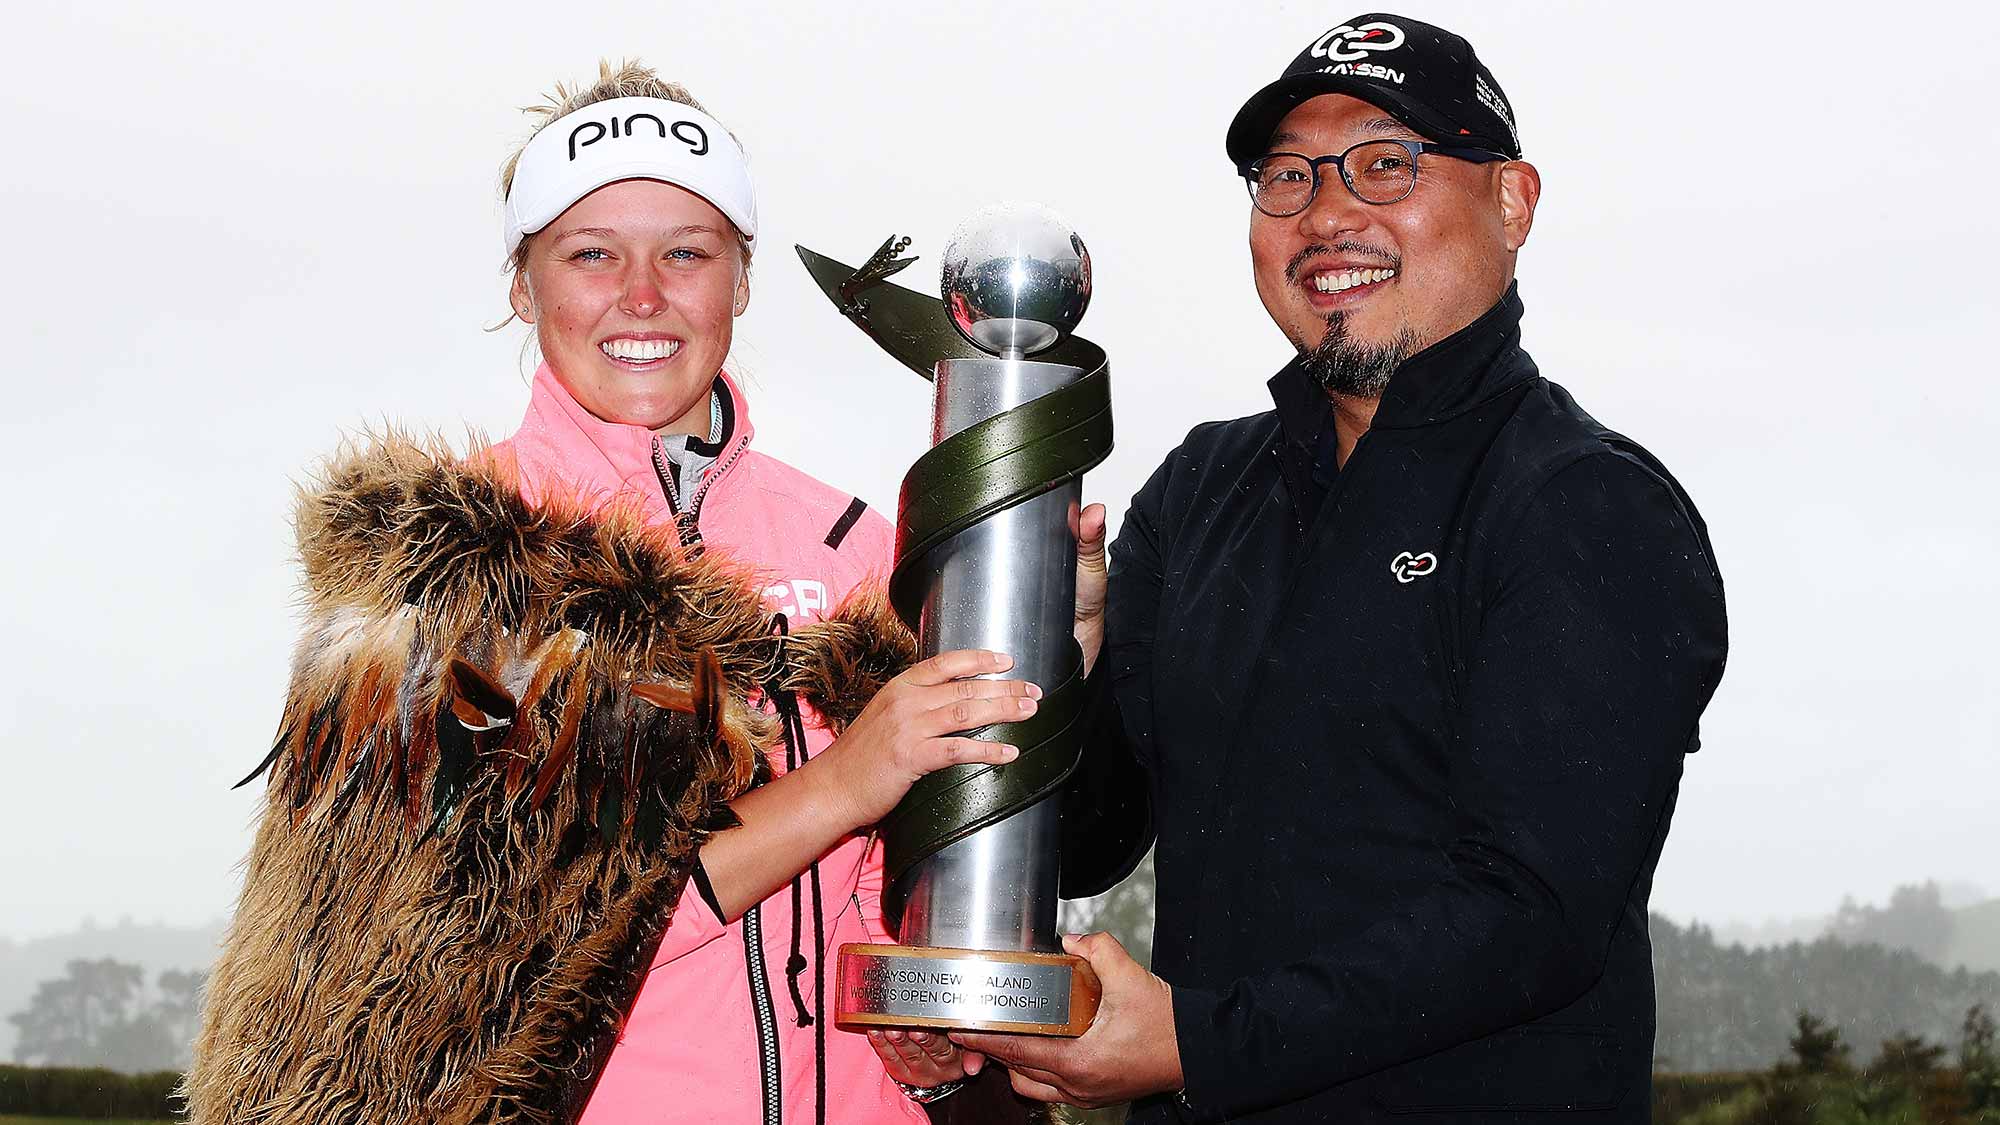 Brooke Henderson of Canada is presented the New Zealand Women's Open trophy by MC Kim during day five of the New Zealand Women's Open at Windross Farm